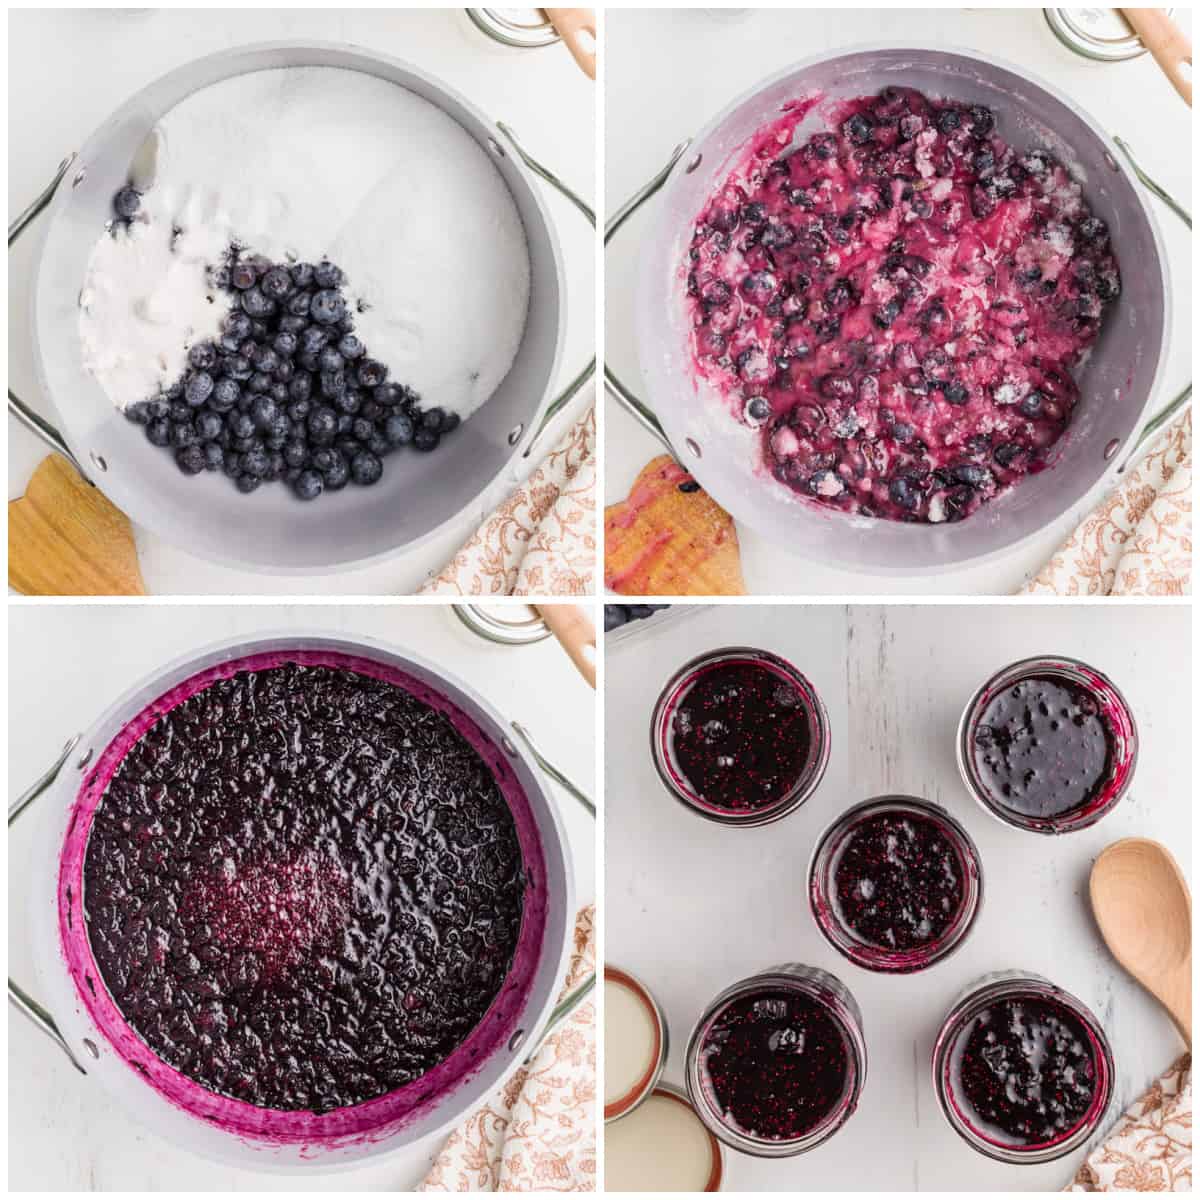 Step by step photos on how to make Blueberry Jam.